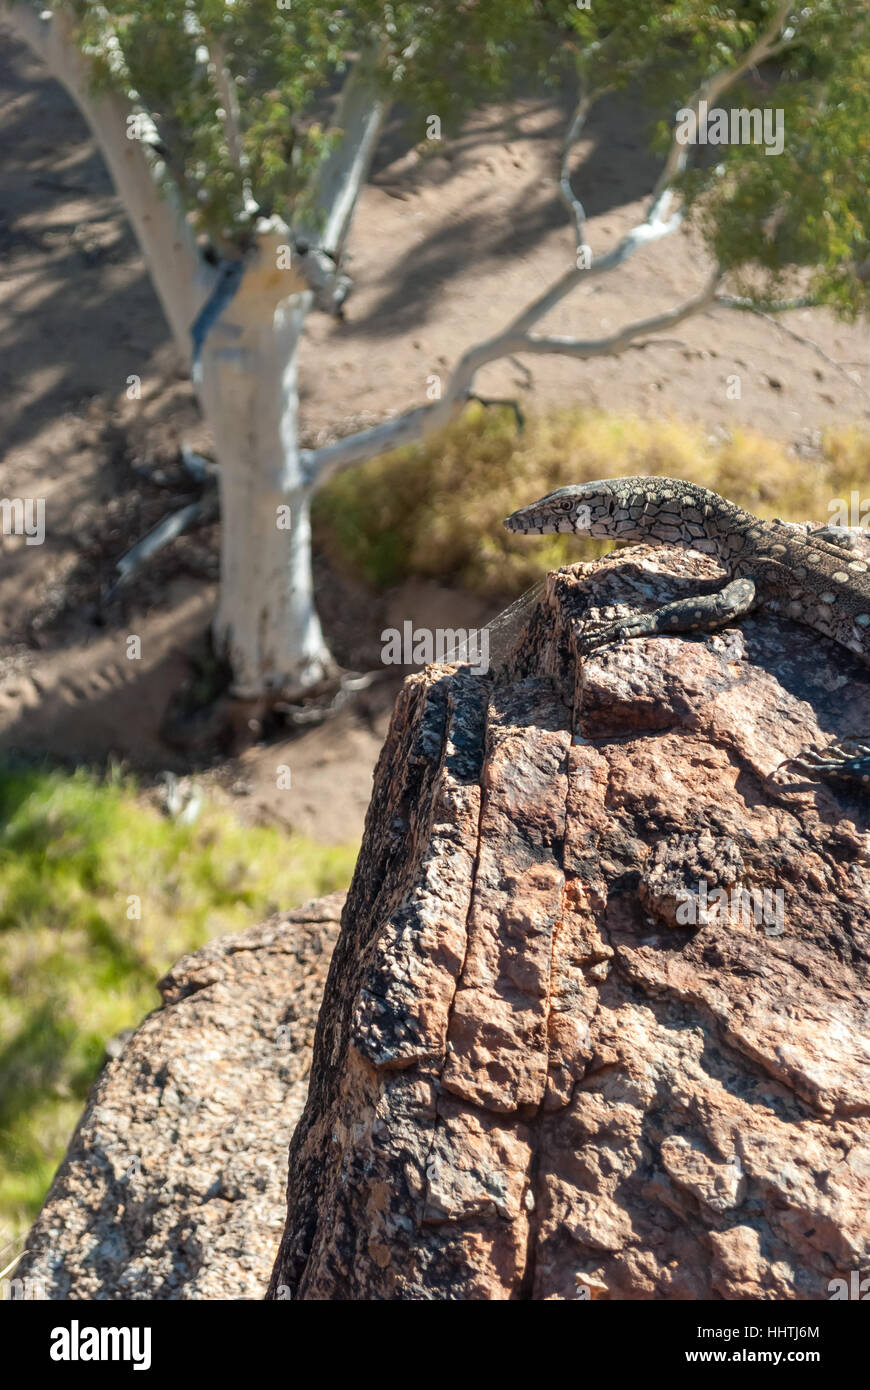 Australian lizard standing on a rock in the outback Stock Photo